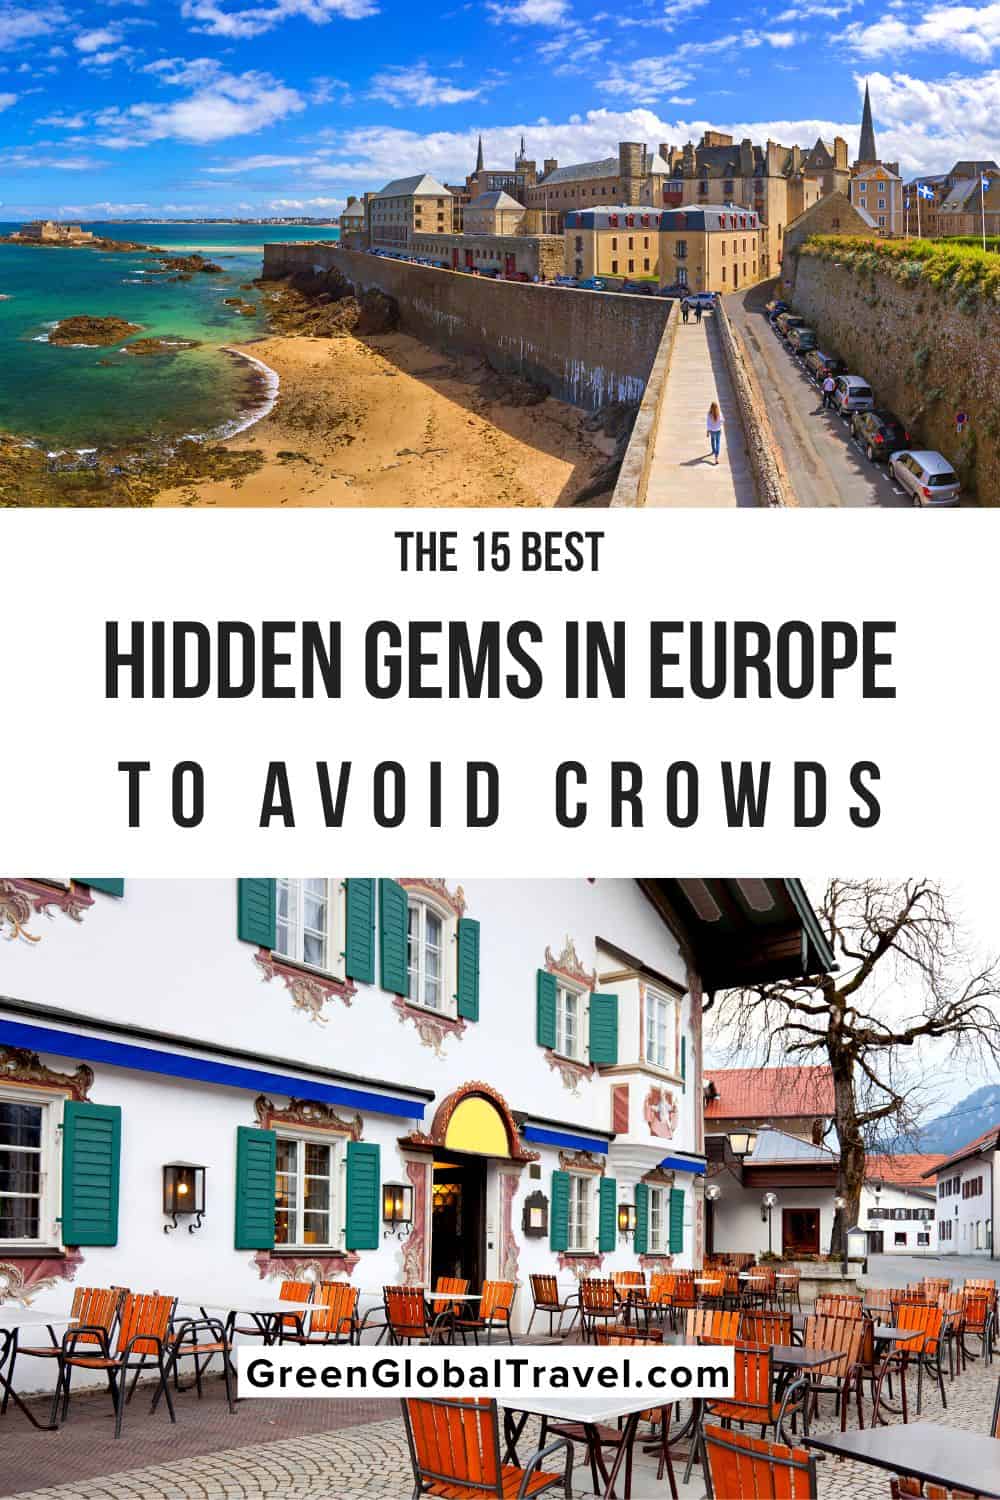 The 15 Best Hidden Gems in Europe to Avoid Crowds, including great places in Europe to visit for historical and cultural attractions. | hidden gems in italy | hidden gems of europe | european hidden gems | hidden gem in europe | europe hidden gems | underrated european cities | cool places europe | unique places to visit in europe | most underrated european cities | hidden gems in croatia | hidden gems in iceland | underrated destinations in europe | off the beaten path europe |